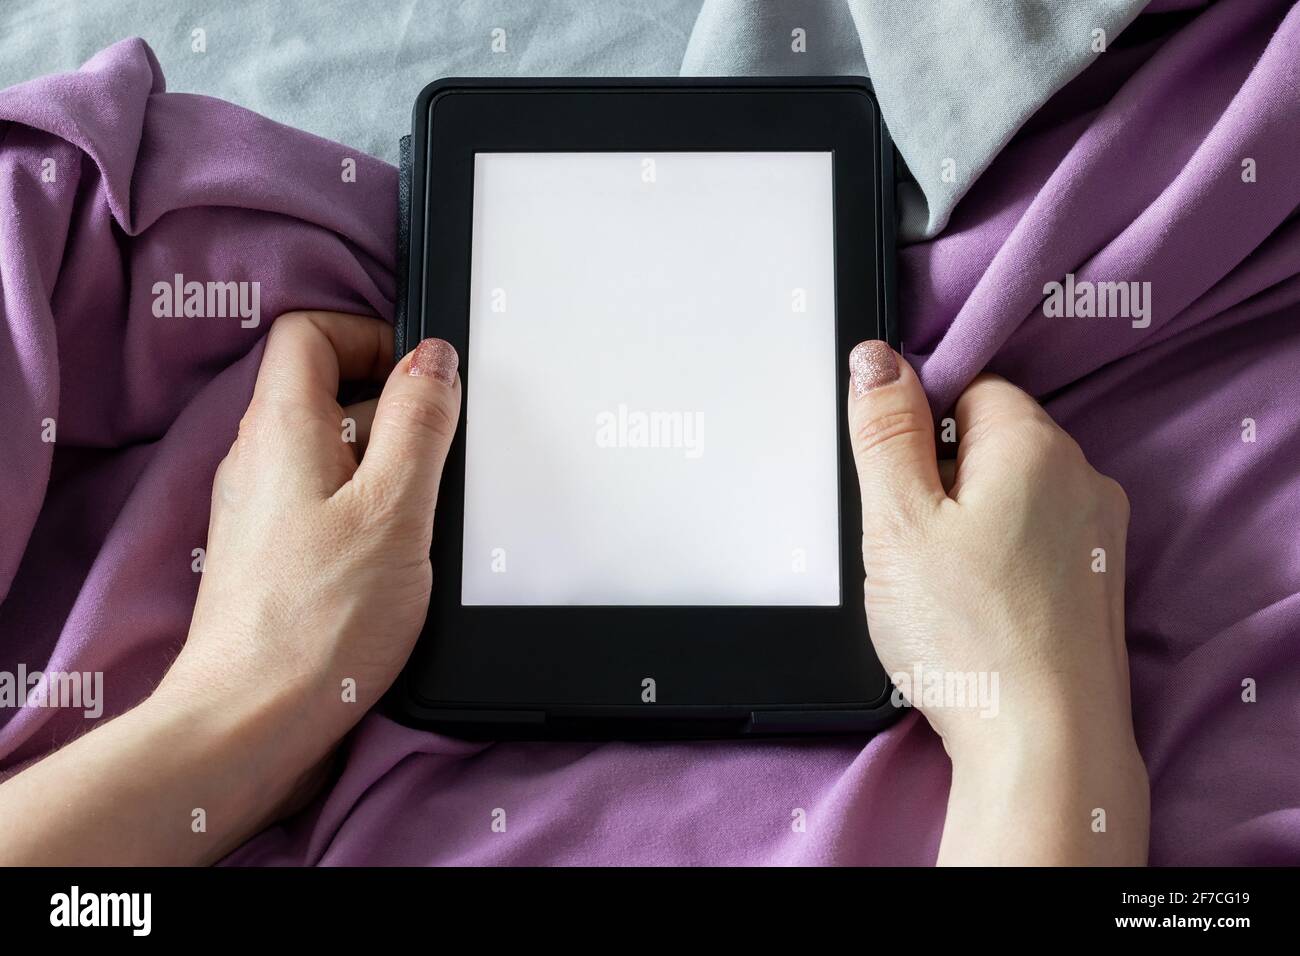 A modern black e-reader electronic book with a blank screen in female hands on a gray and purple bed. Mockup tablet on microfiber bedding closeup Stock Photo